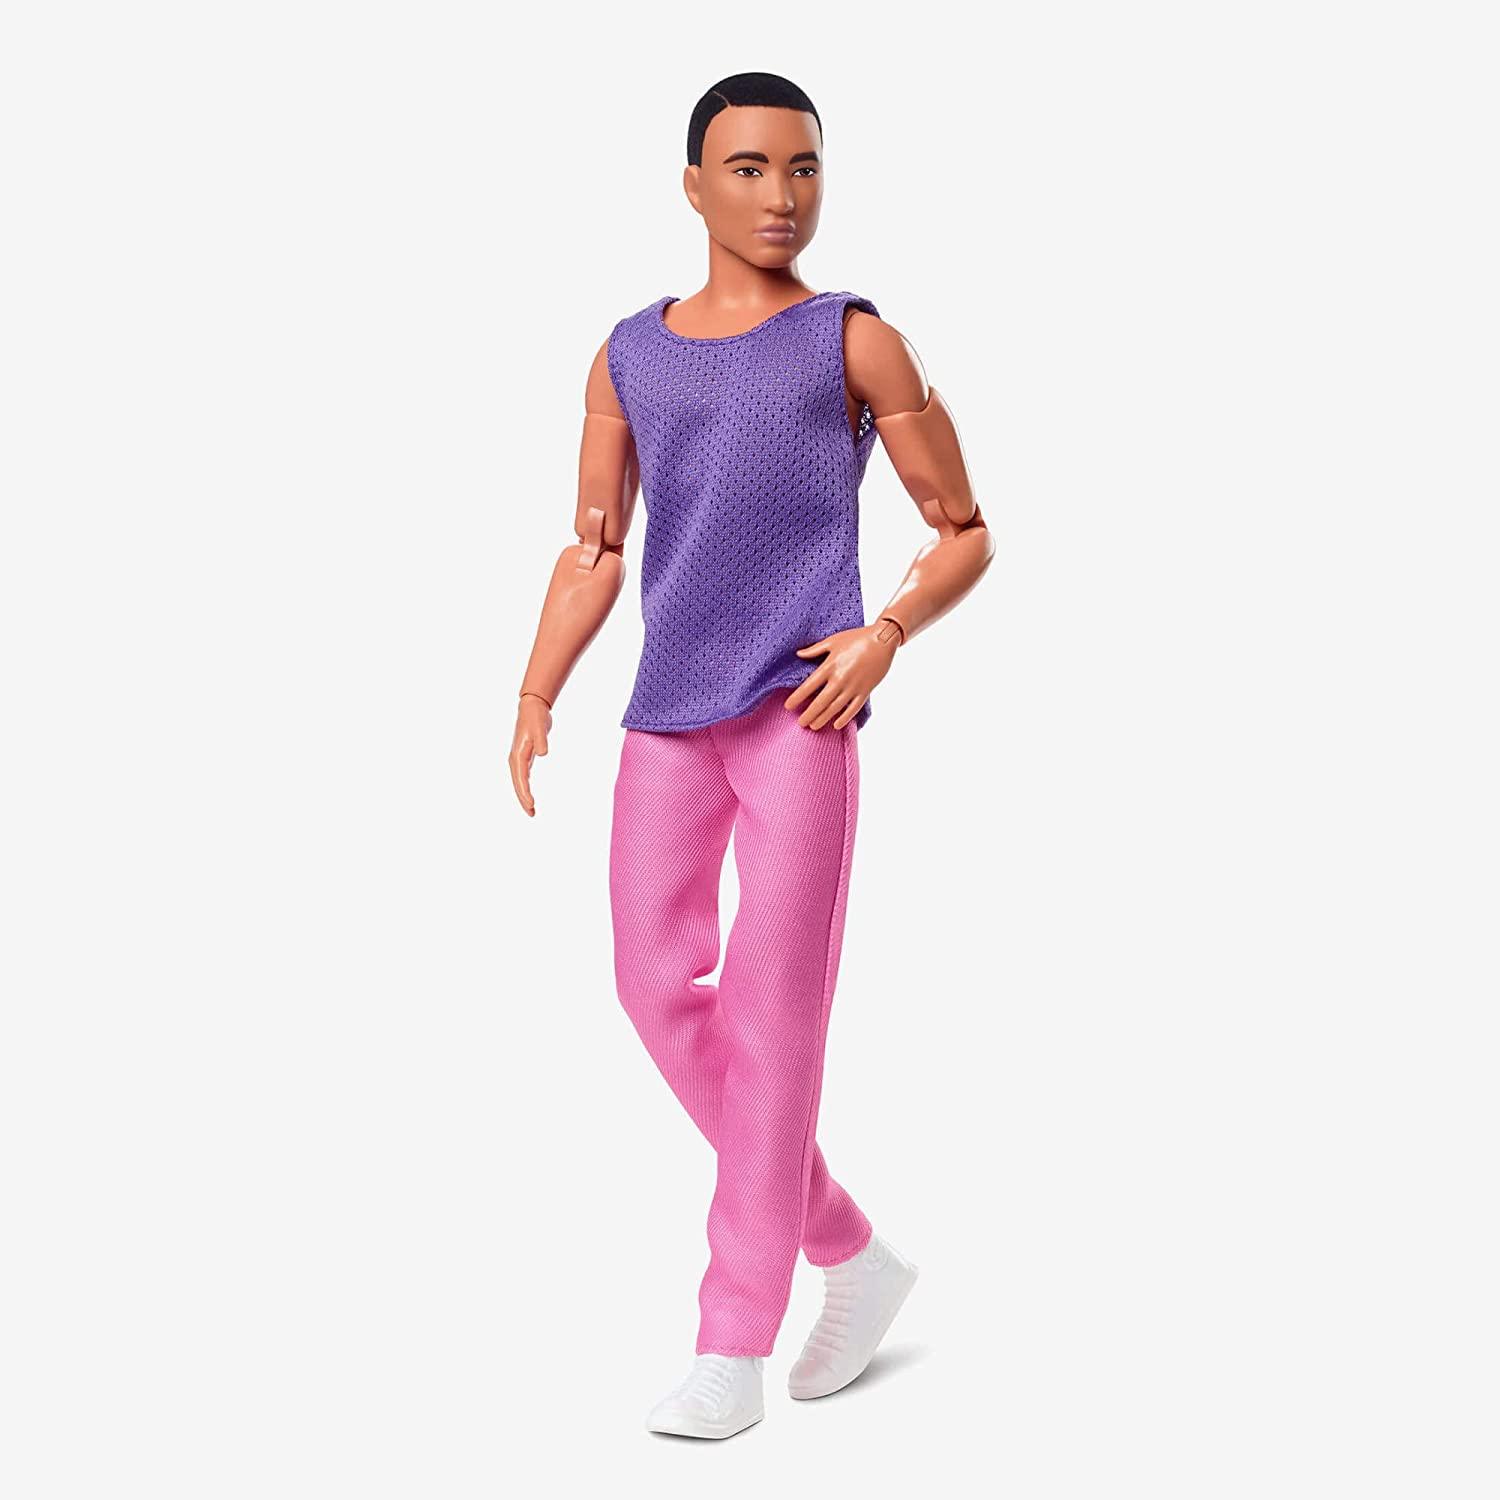 Ken Doll, Barbie Looks, Black Hair, Color Block Outfit, Purple Mesh Top with Pink Pants, Style and Pose, Fashion Collectibles - BumbleToys - 5-7 Years, Barbie, Barbie Looks, Fashion Dolls & Accessories, Girls, Pre-Order